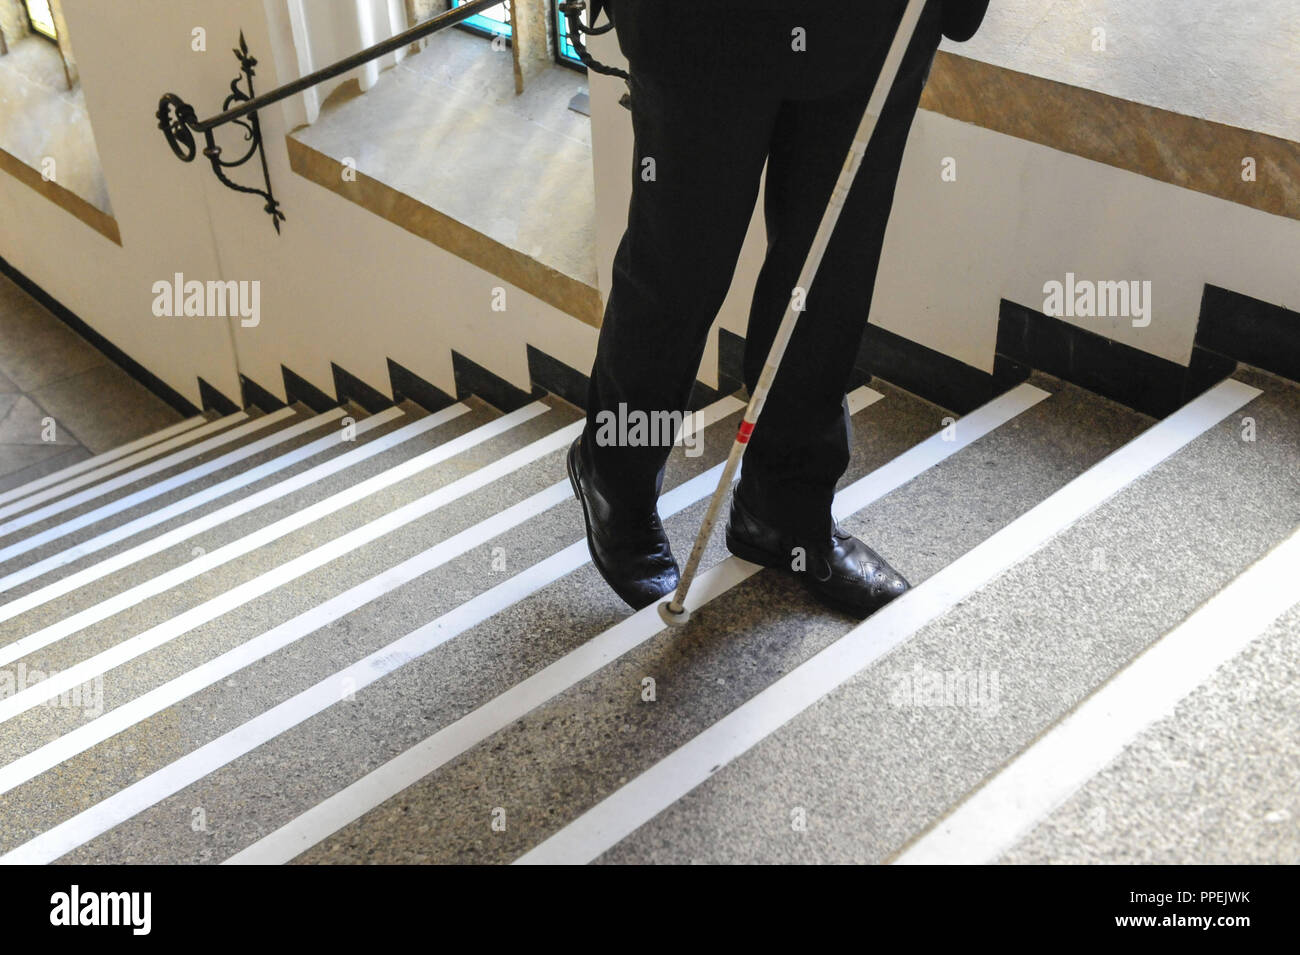 On the occasion of the nationwide Day of Visually Impaired People, the Bavarian Blind and Visually Impaired Association (Bayerischer Blinden- und Sehbehindertenbund e.V. - BBSB) won the cooperation of the City of Munich and the Munich Stadtmuseum fo the action 'Contrasting stair markings make staircases safer'. For this occasion, the staircase in the Town Hall is provided with a marking strip on every step, a better illumination and braille on the handrail. Stock Photo